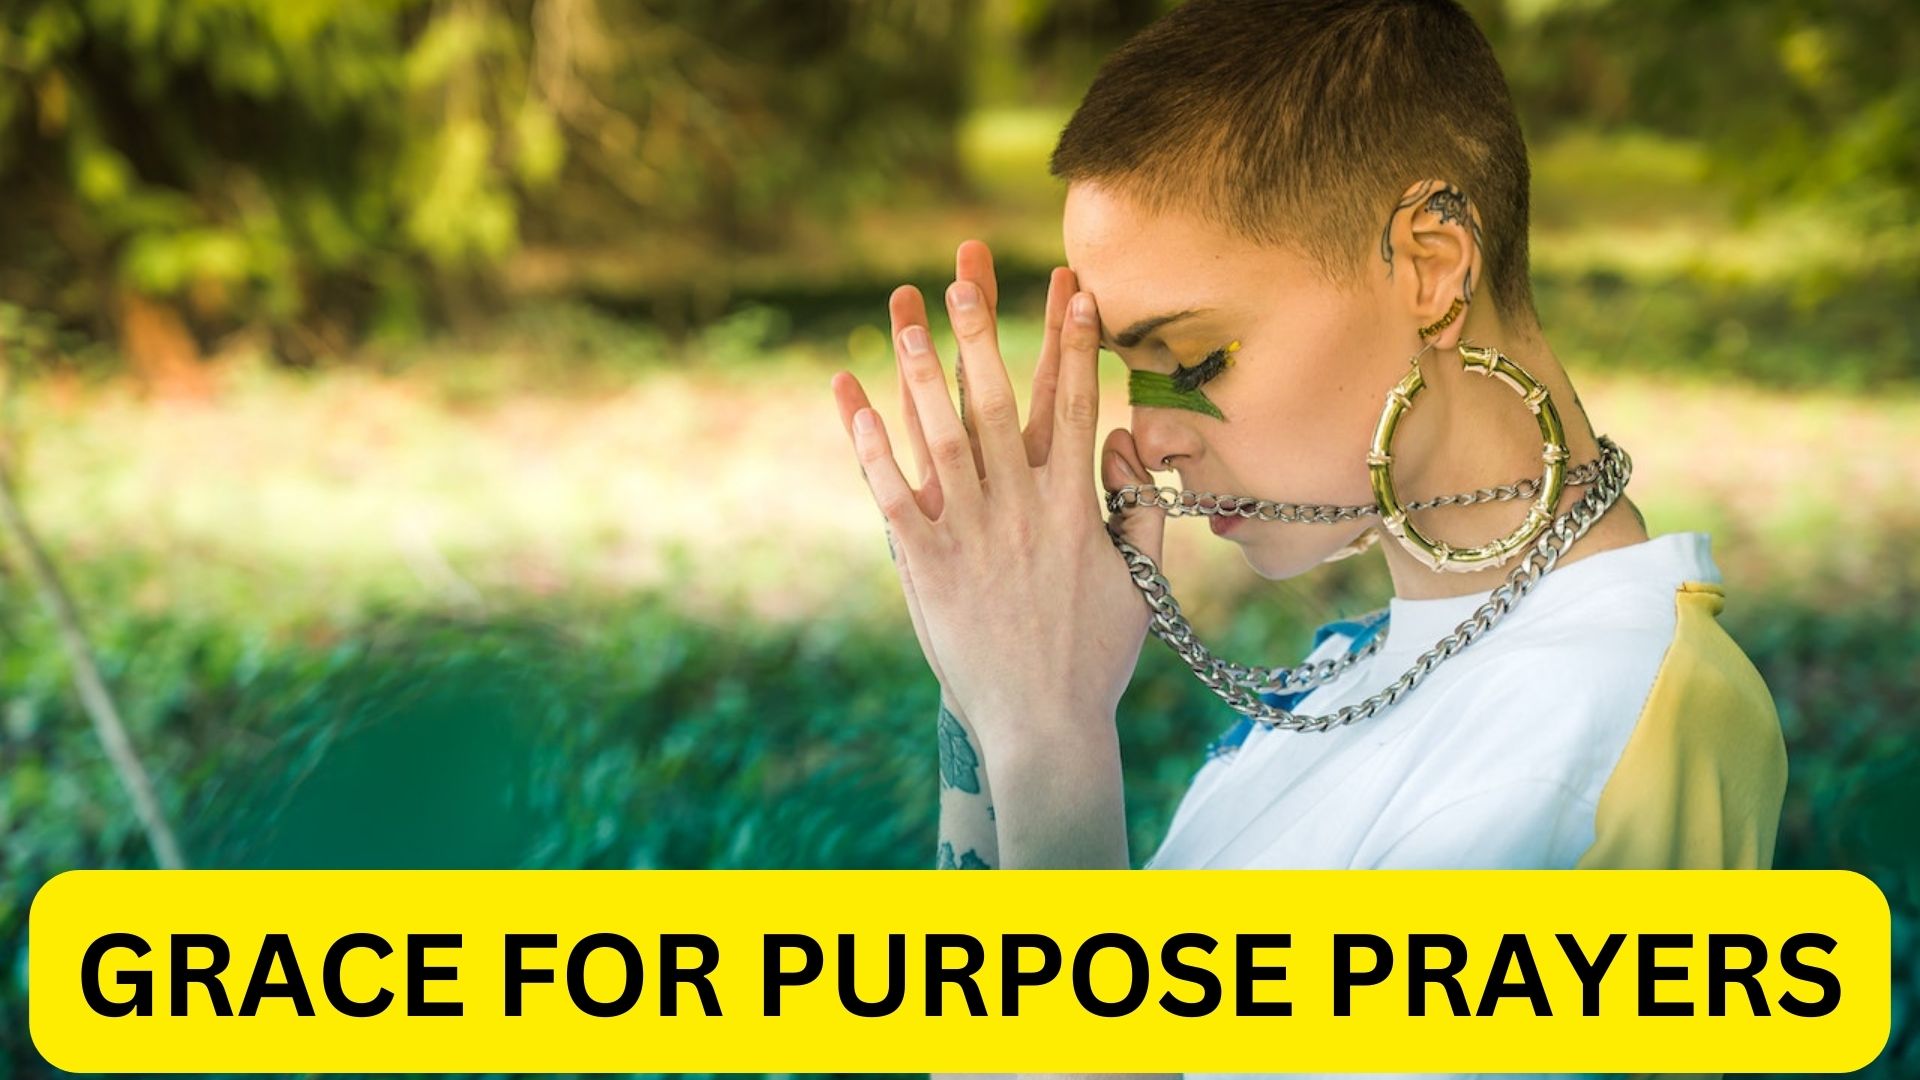 Grace For Purpose Prayers - Uplifting, Blessing, And Empowering